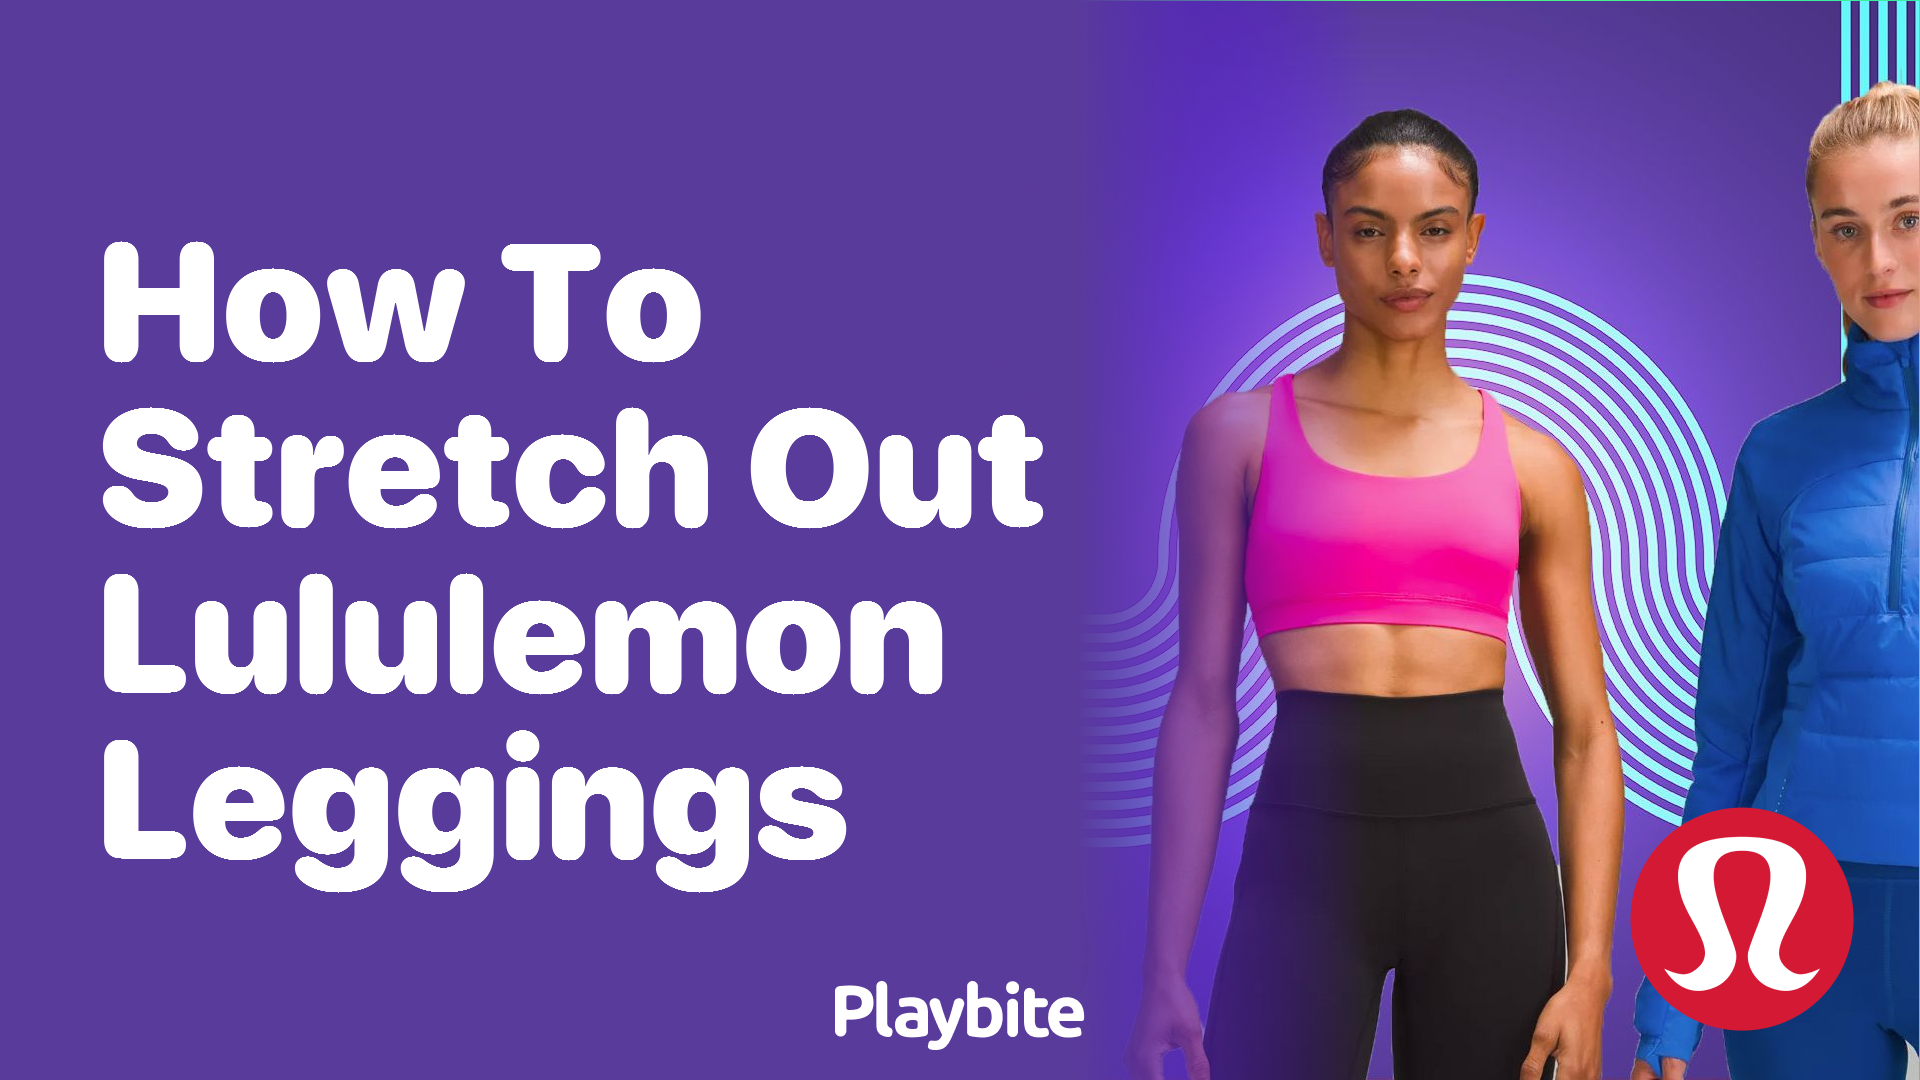 How to Stretch Out Lululemon Leggings - Playbite